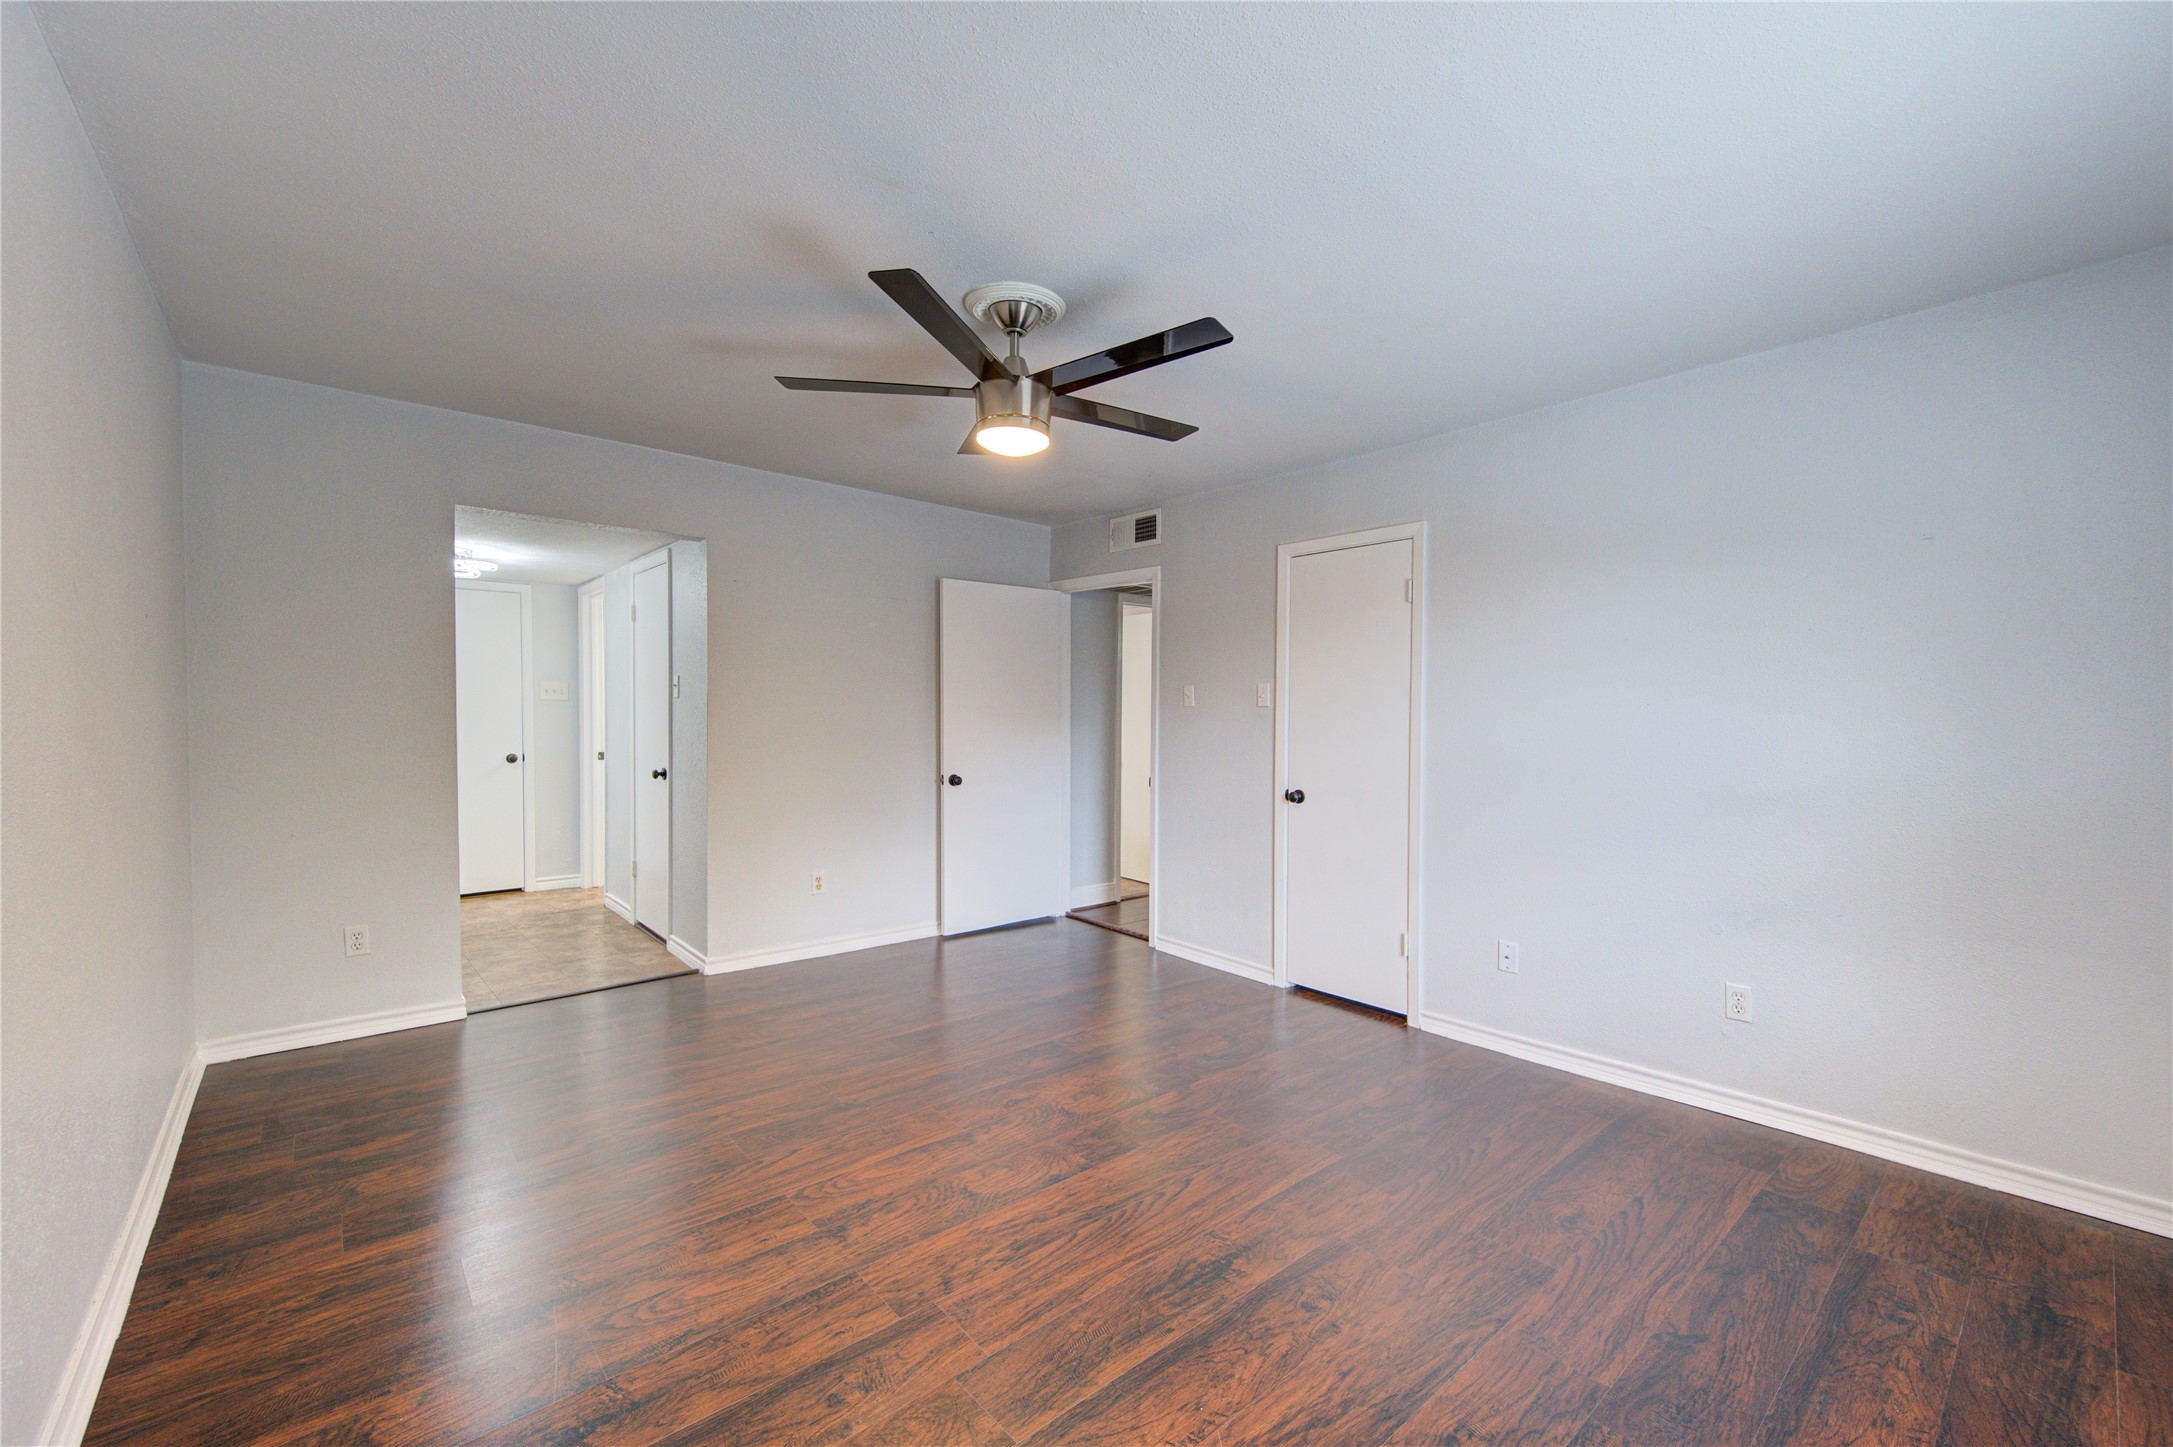 At the end of the hall you'll find this bright & spacious primary bedroom that features two walk-in closets and a new sleek ceiling fan.